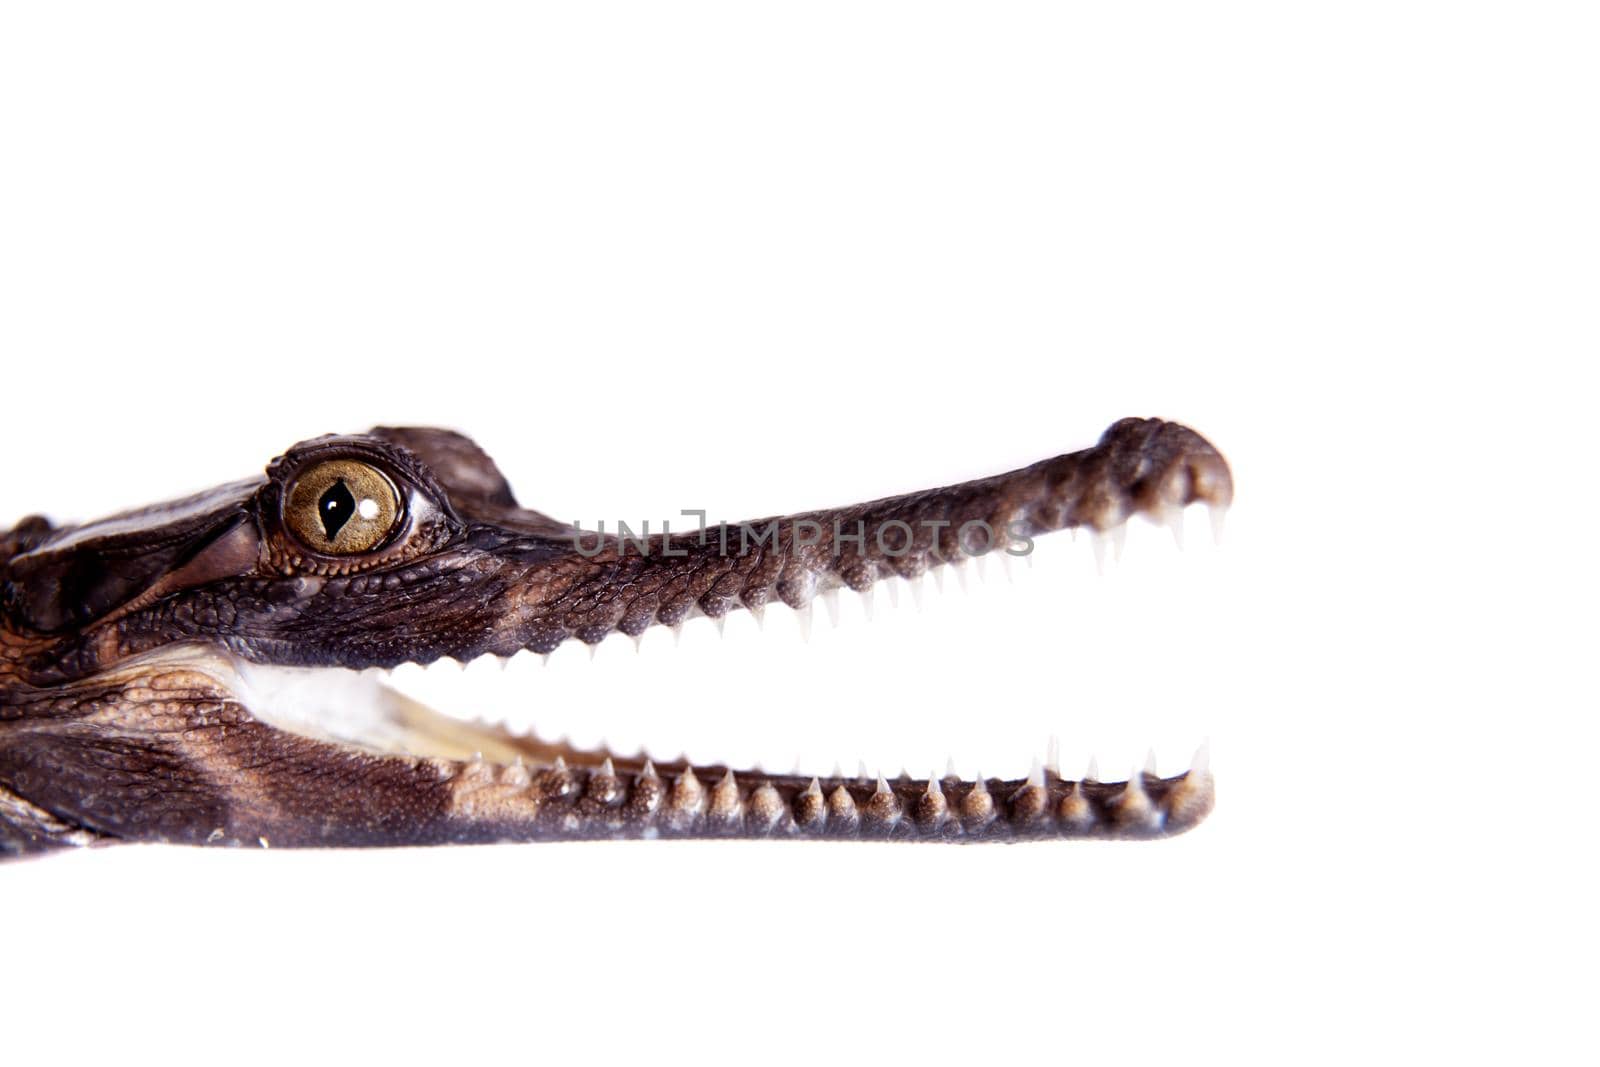 The false gharial , Tomistoma schlegelii, isolated on white background